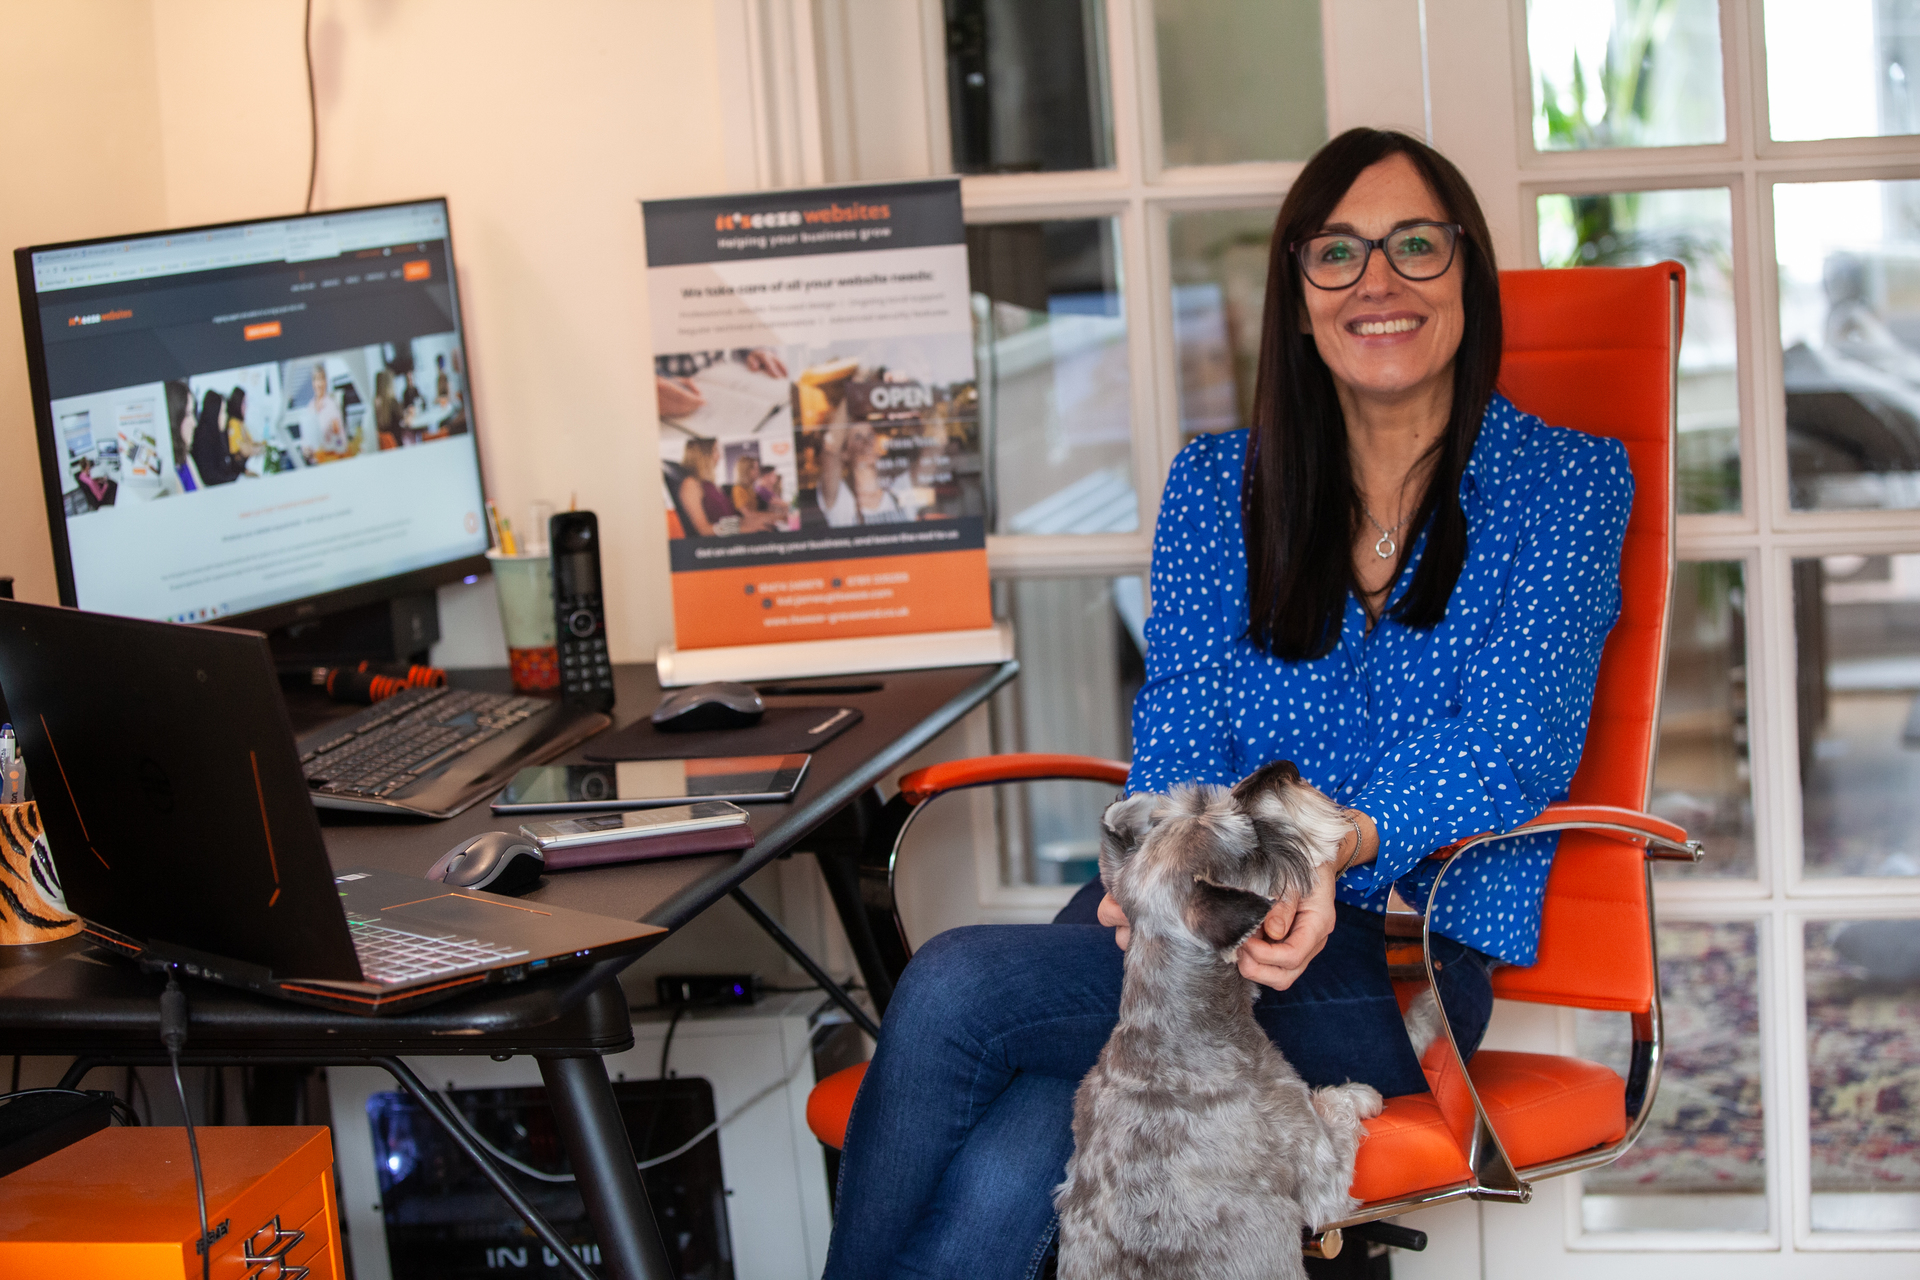 Gravesend web consultant Kat James sat at her desk with her dog